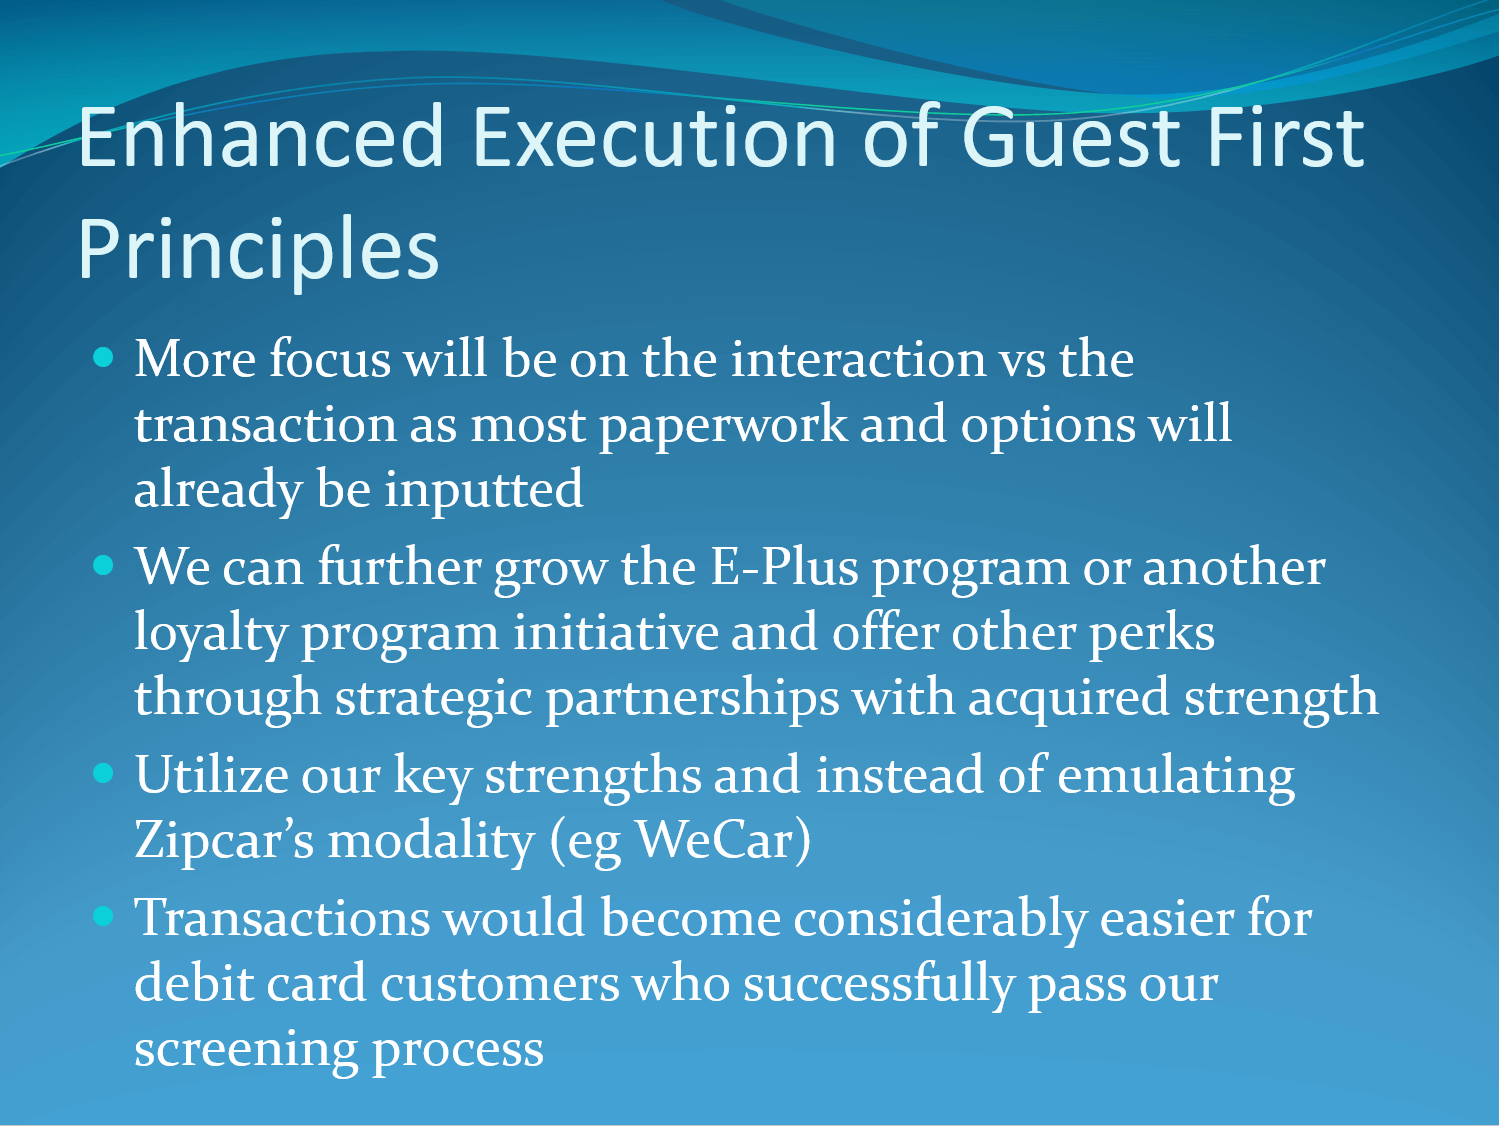 Powerpoint slide from Enterprise Holdings' subscription model by Bilal Qizilbash showcasing the guest experience principles in text.